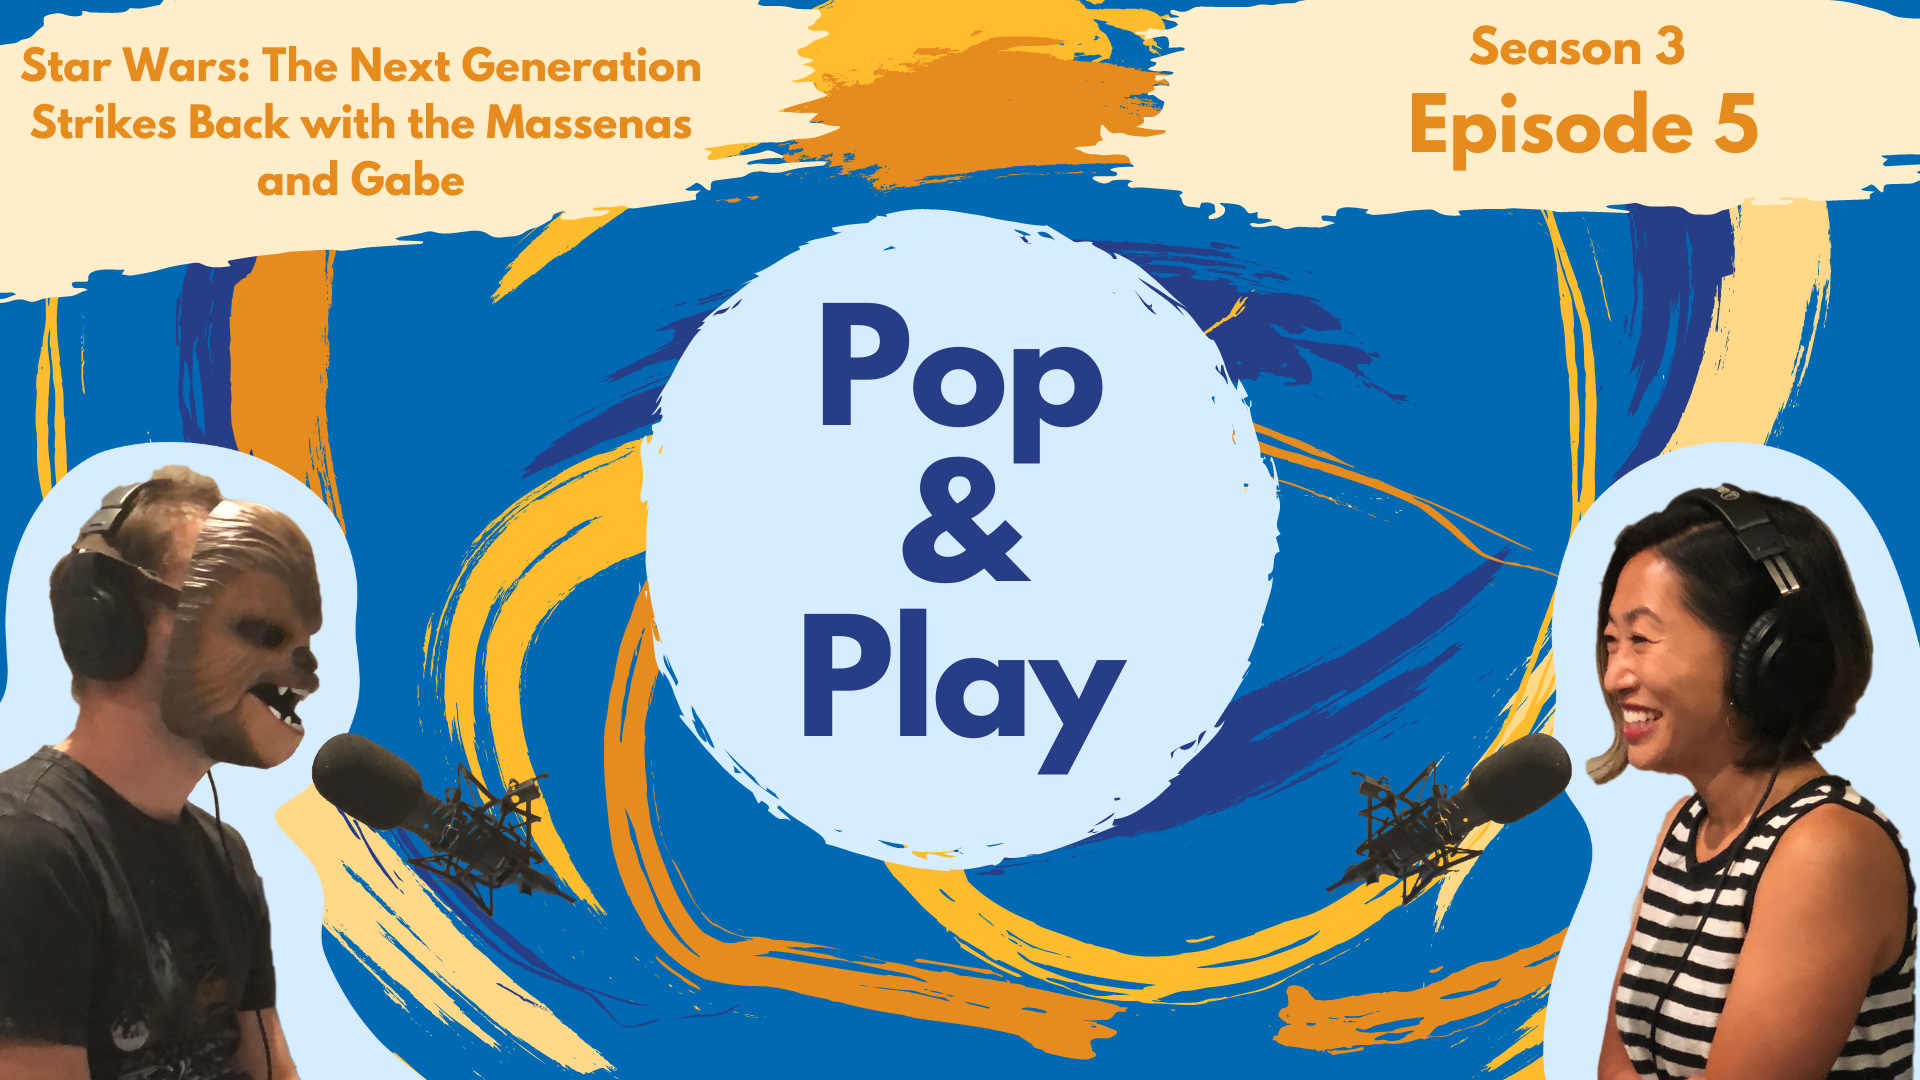 Pop and Play Season 3 Episode 5 image with logo